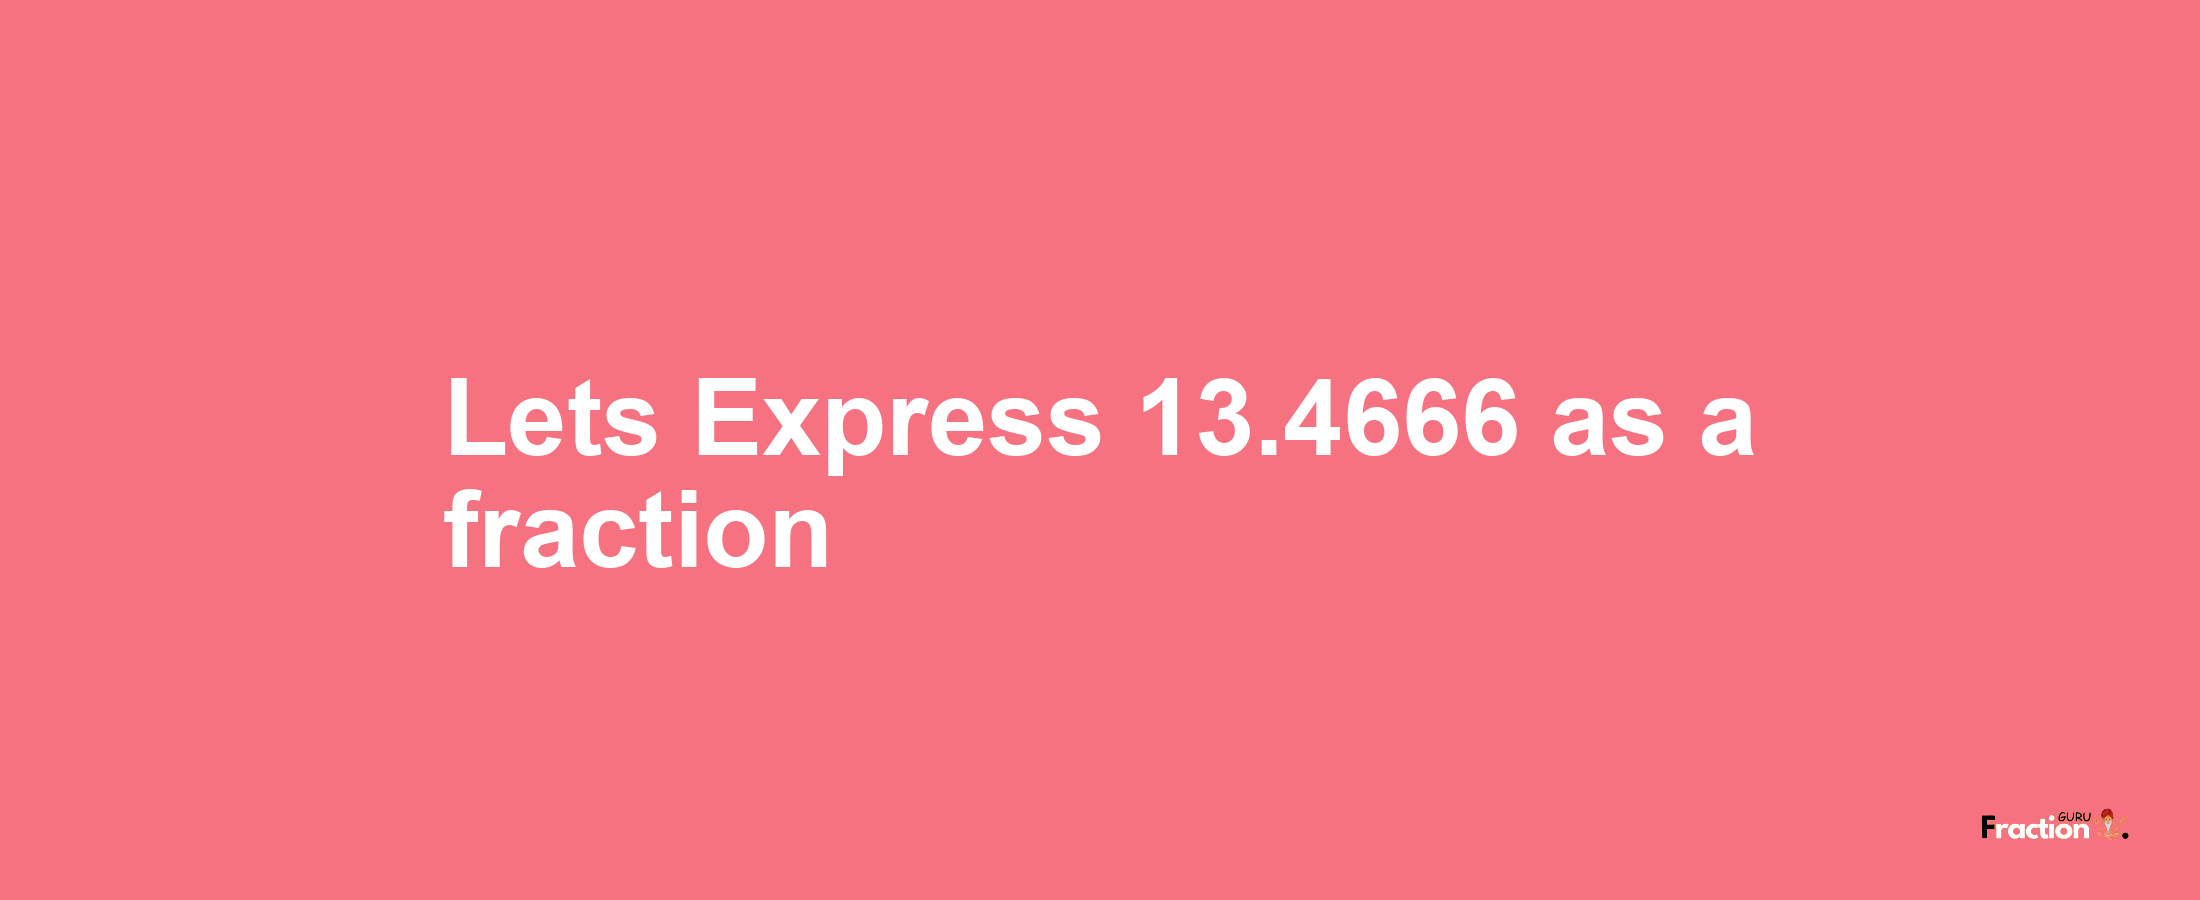 Lets Express 13.4666 as afraction